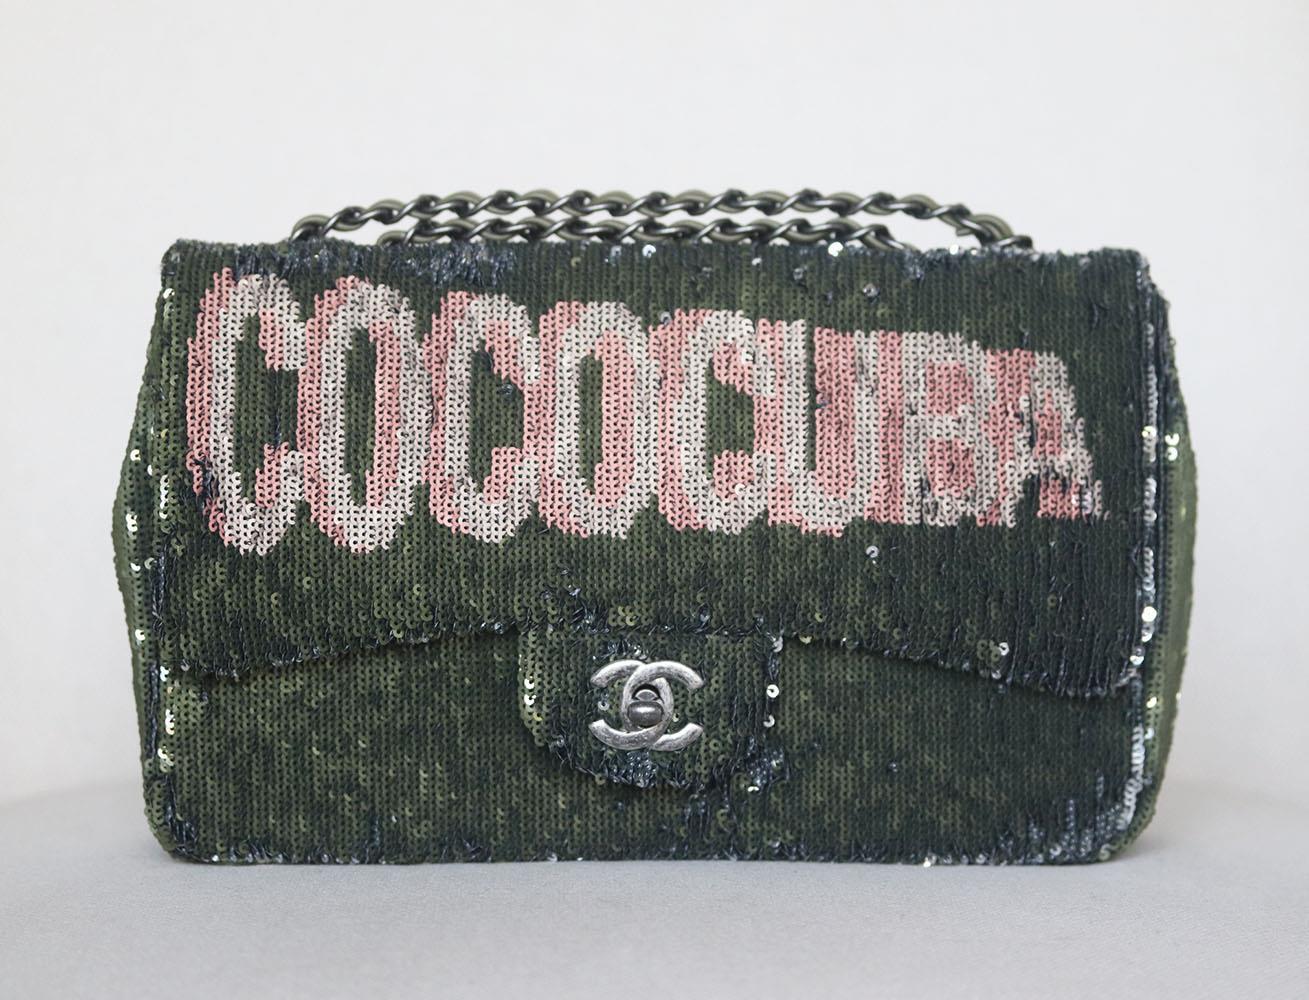 Chanel Cruise 2017 Lambskin Trimmed Sequin Classic Flap Bag has been hand-finished by skilled artisans in the label's workshop, it is boasting a metallic two-tone sequin exterior with 'COCOCUBA' embellished on the front, this design is accented with